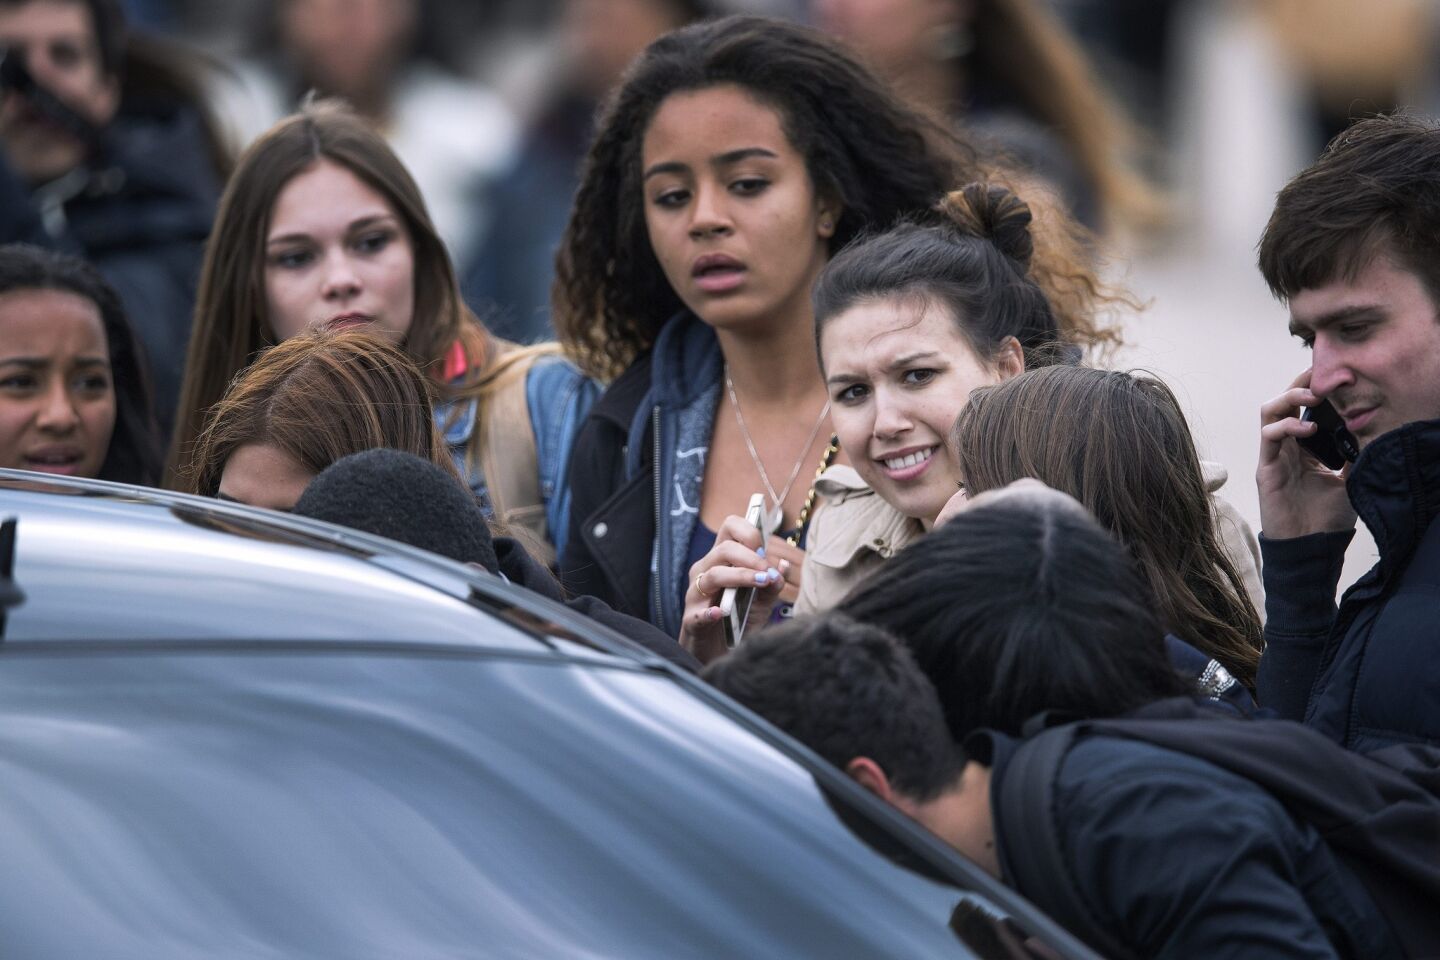 Fans were gathered outside Versailles awaiting Kim Kardashian and Kanye West's arrival on May 23.